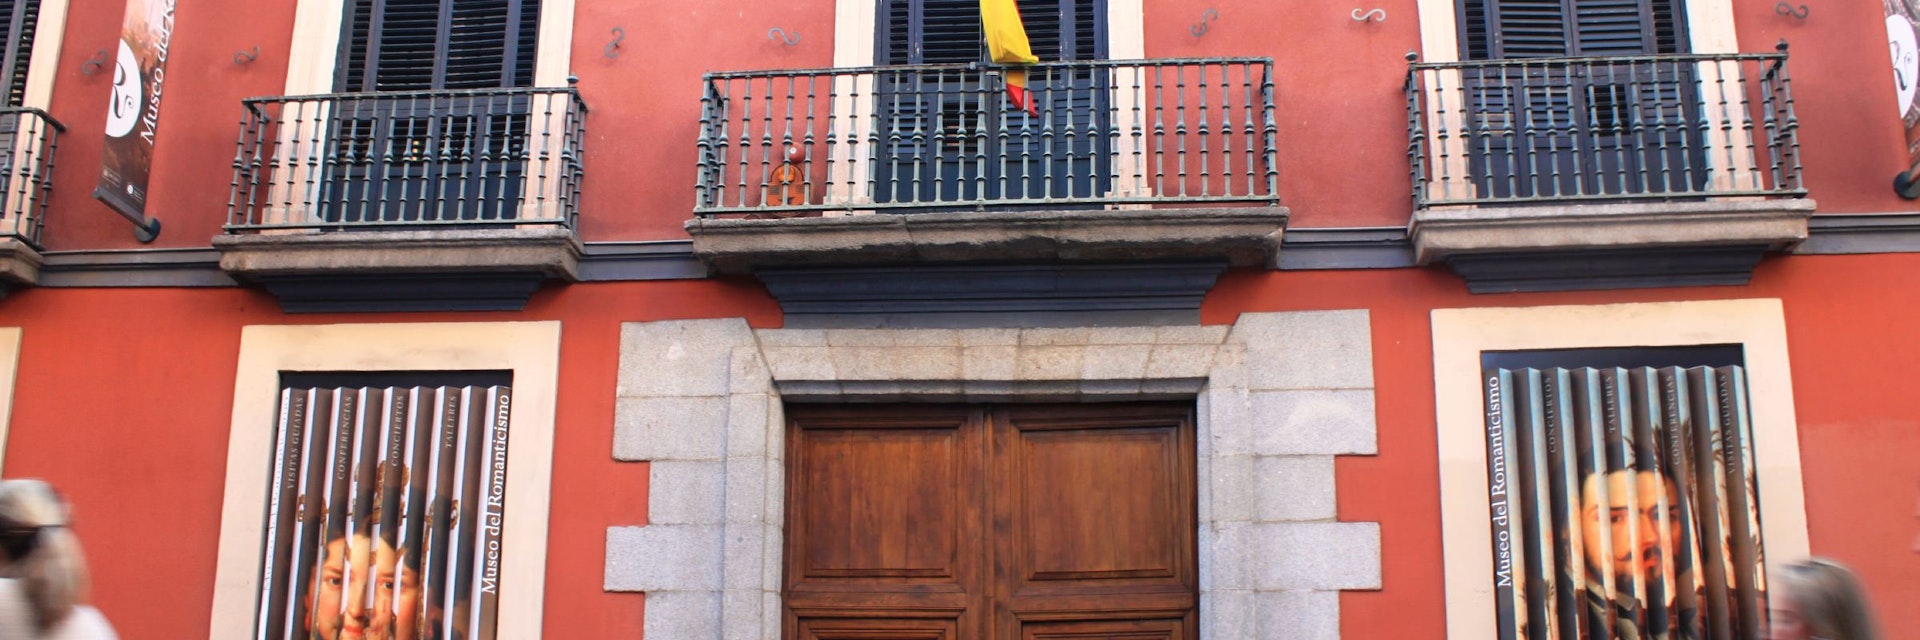 The Spanish flag flies outside of the Museo del Romanticismo.